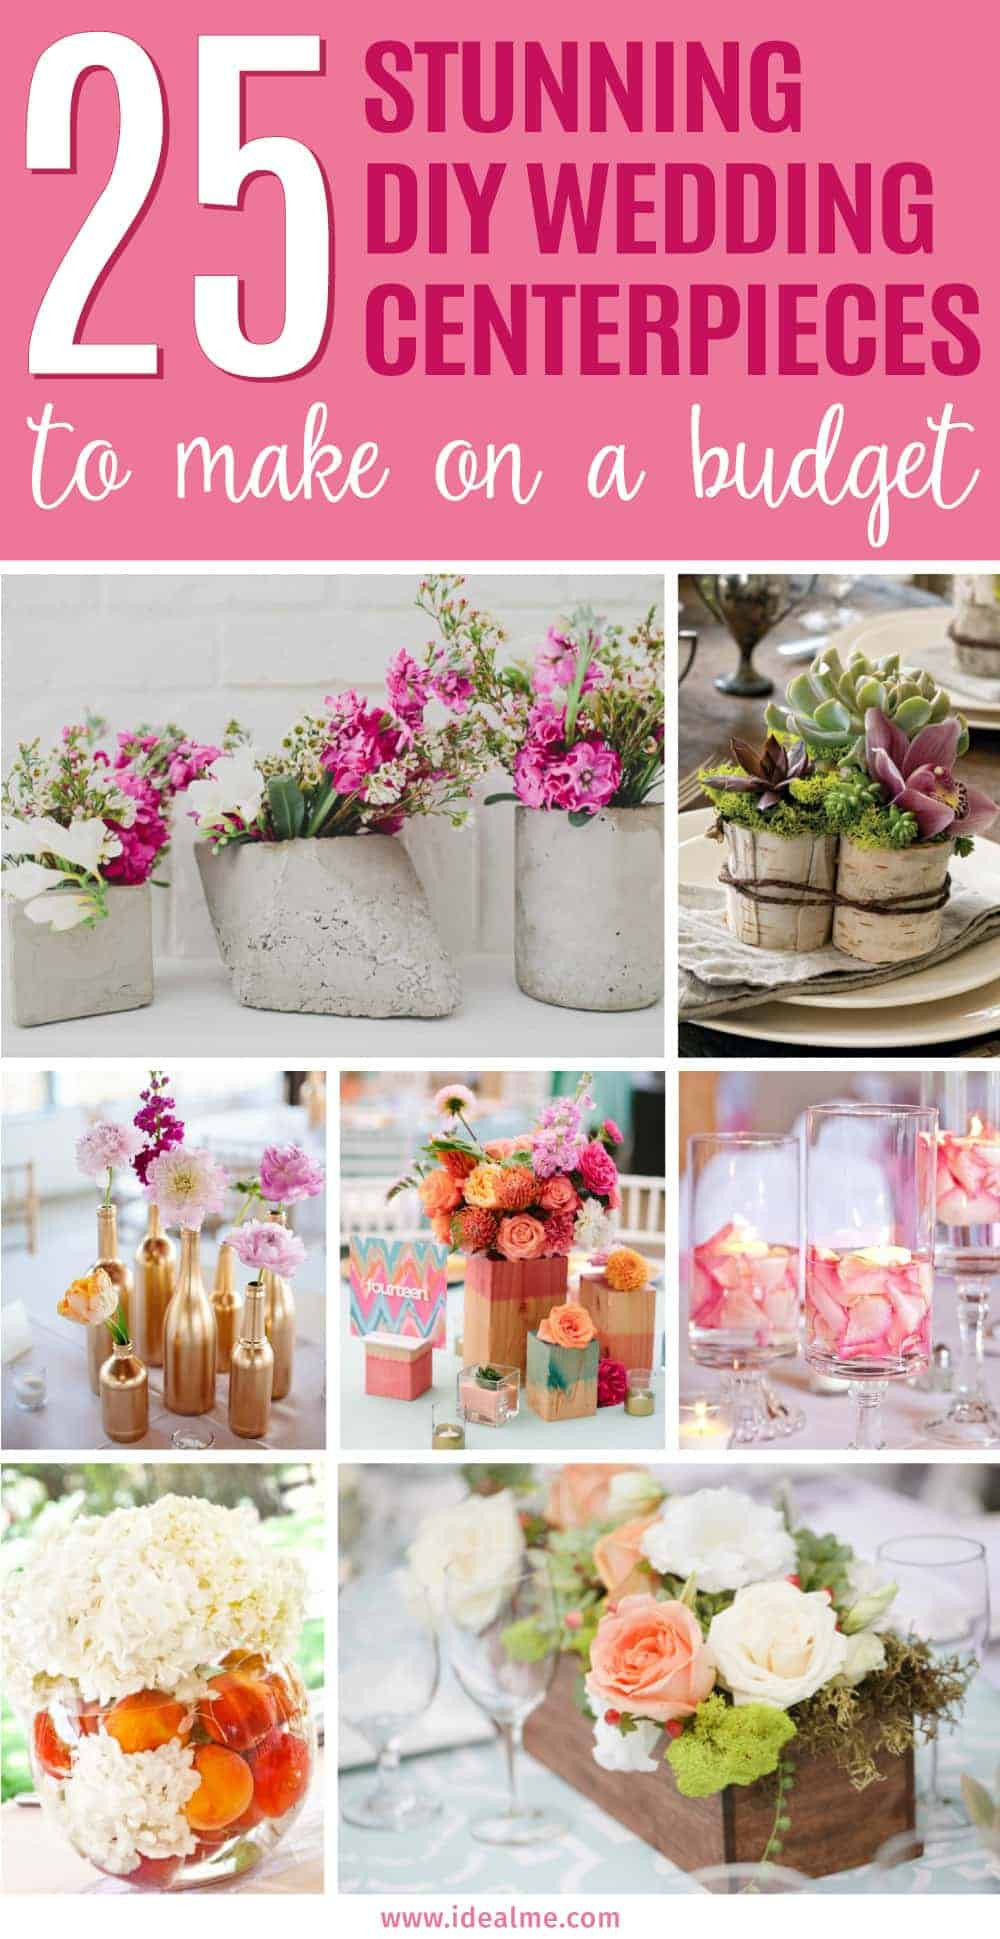 DIY Centerpieces For Wedding
 25 Stunning DIY Wedding Centerpieces to Make on a Bud